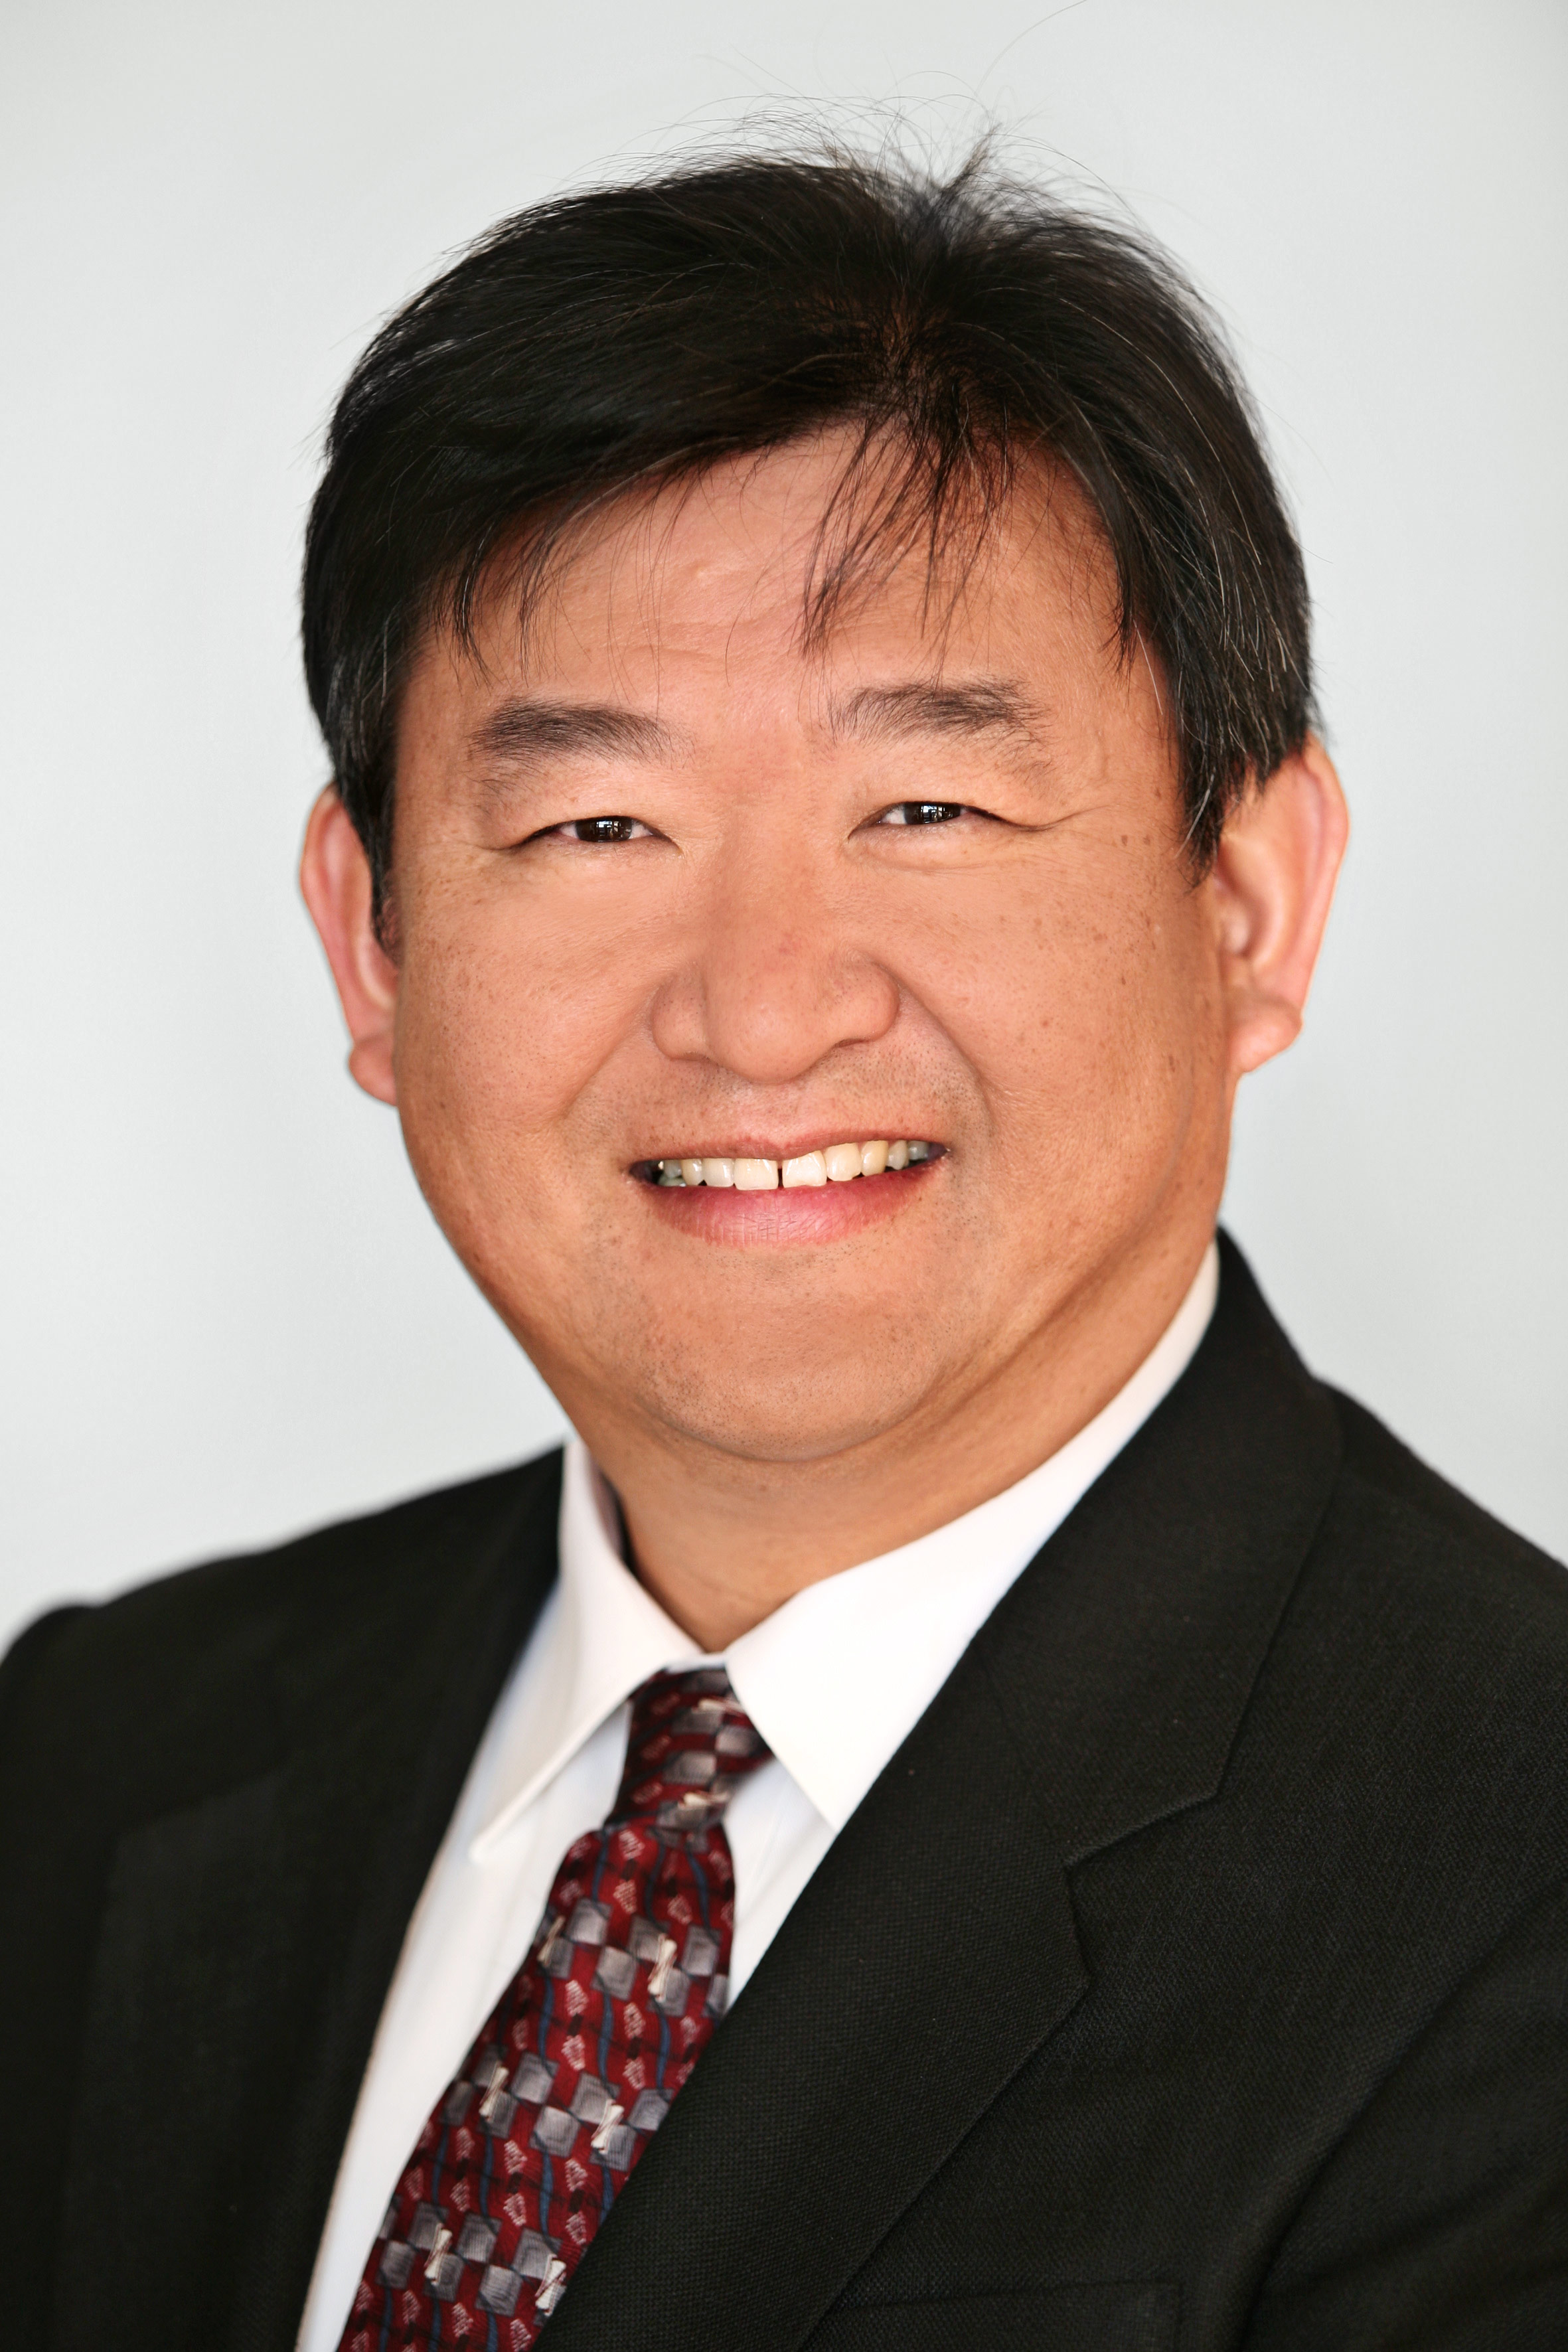 ZMDI announces the Hiring of Ed Lam as Vice President of Marketing and Business Development Based in the United States